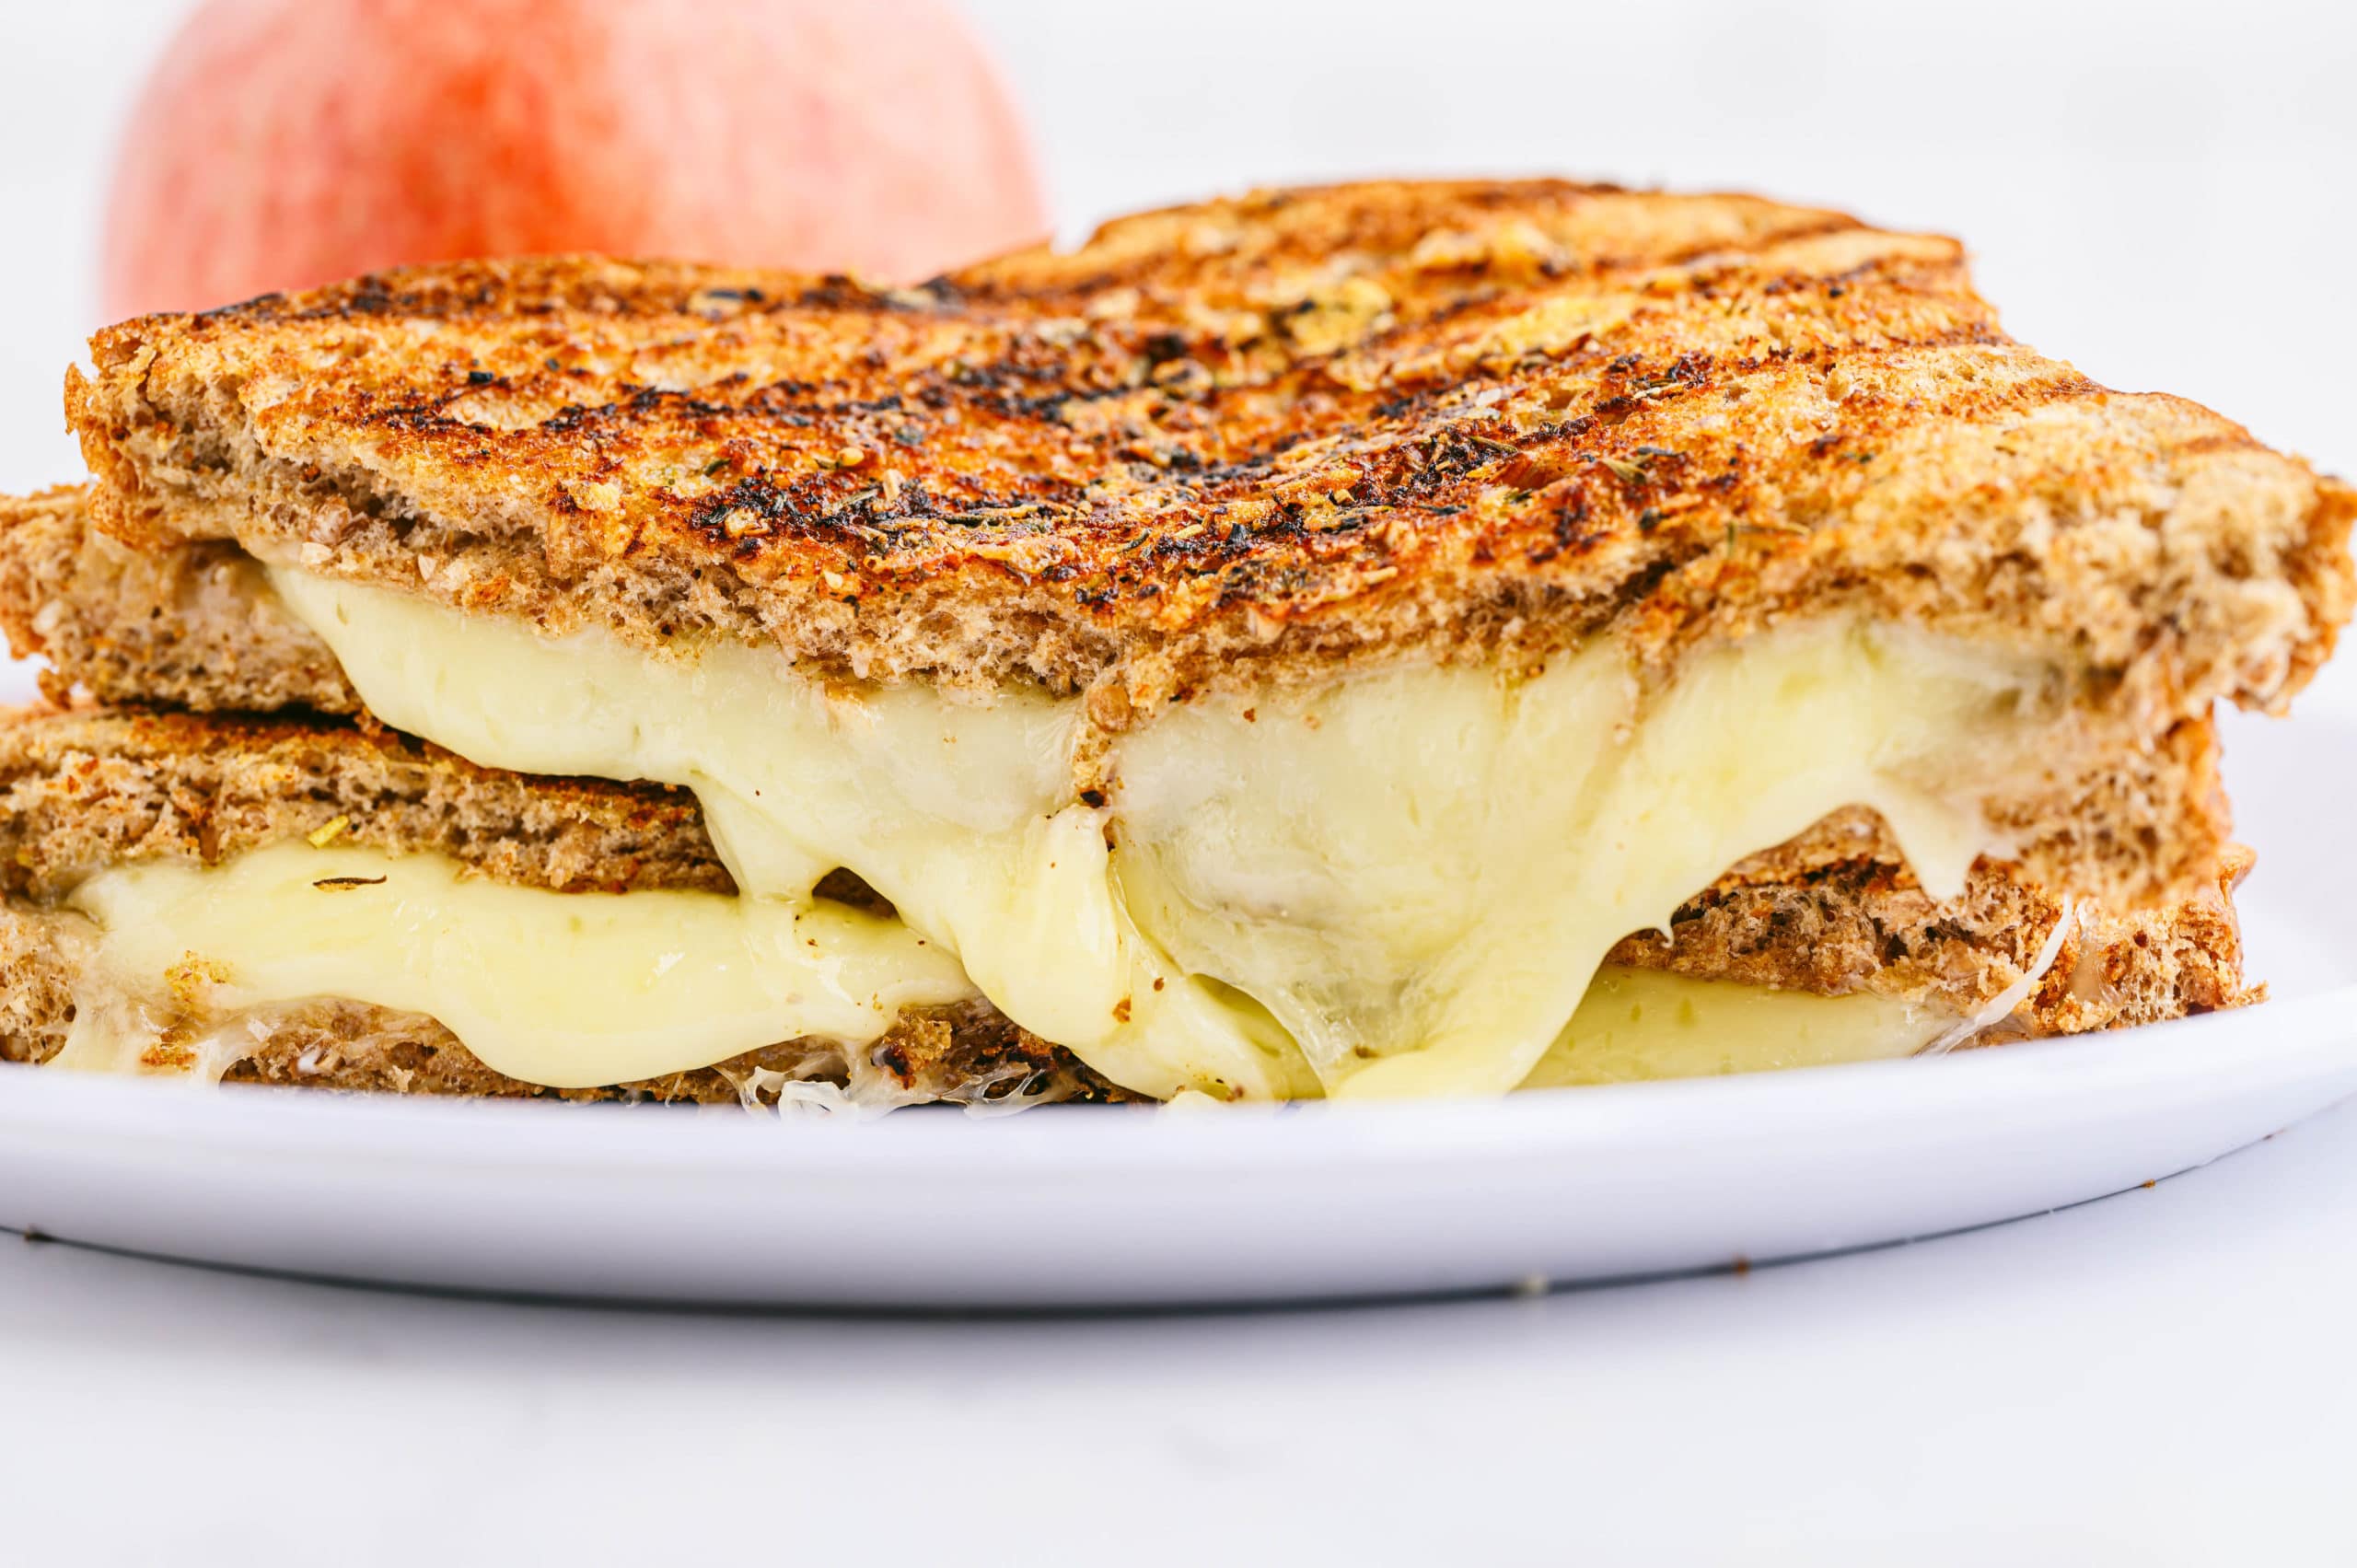 Lunch – Grilled Herb and Cheese Panini